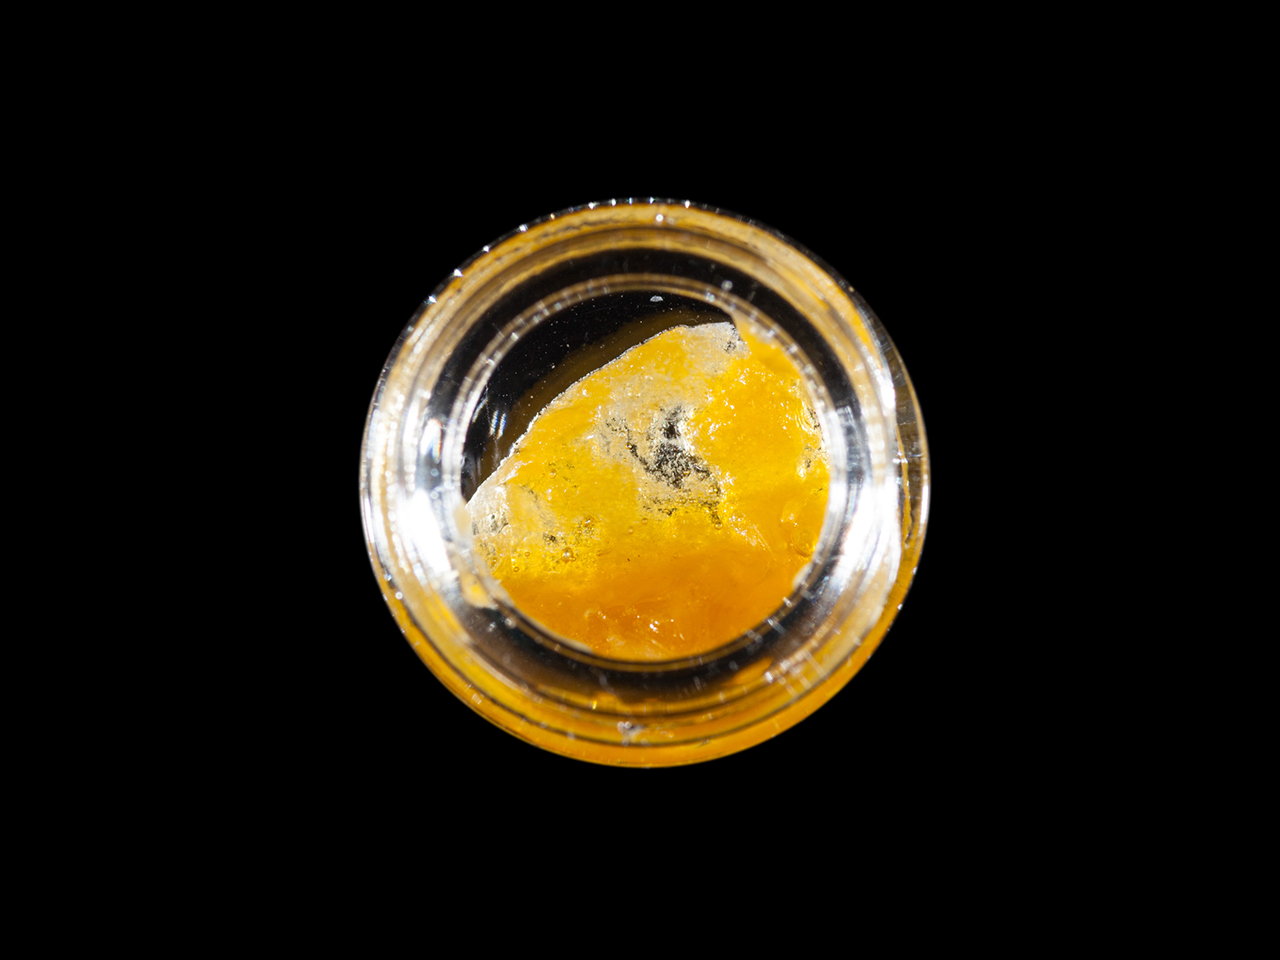 2016 Michigan Medical Cannabis Cup, Top 10 Hybrid Concentrates